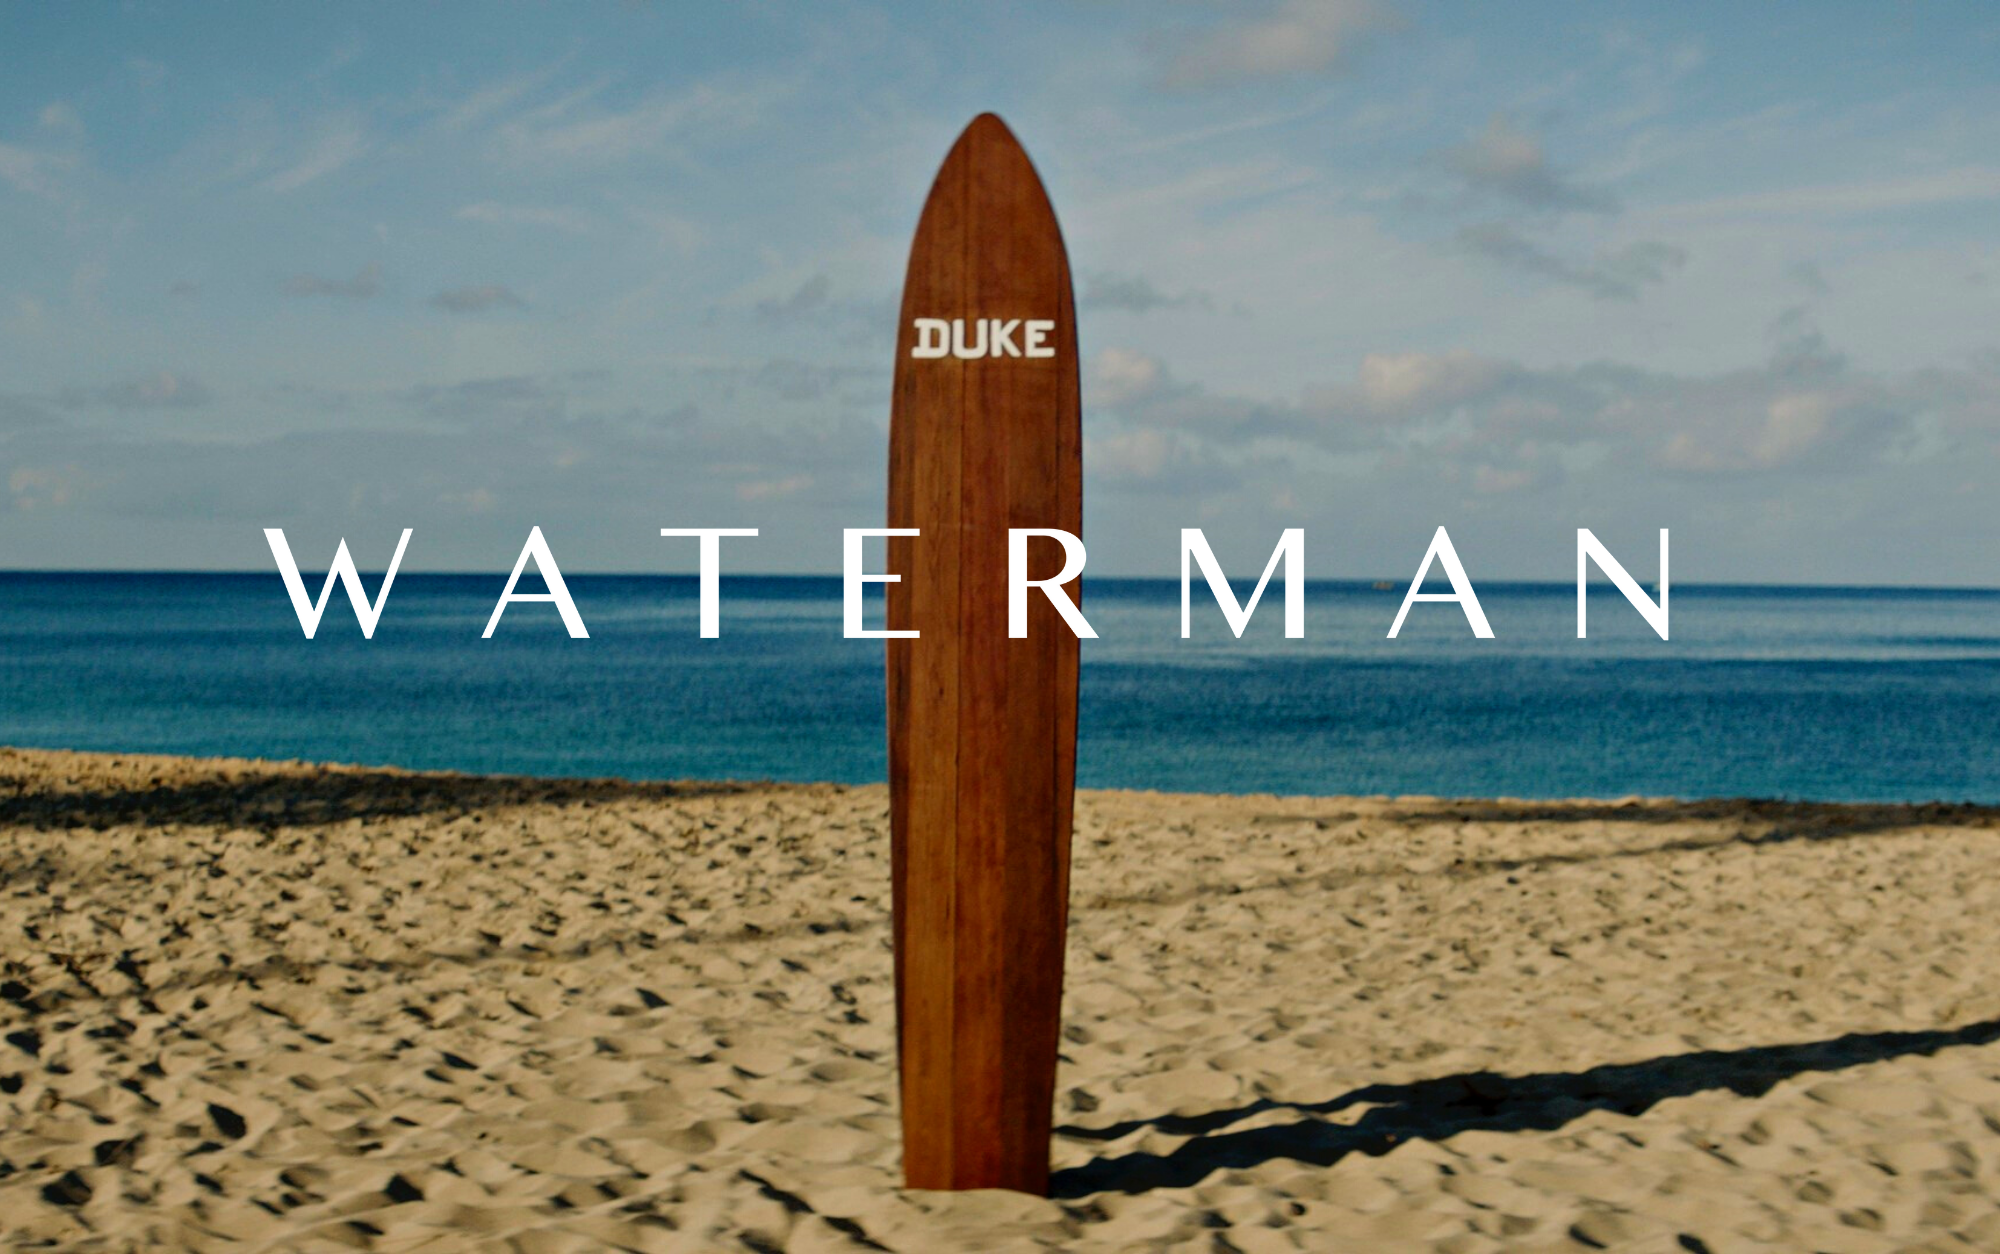 Waterman is Available on Hawaiian Airlines’ In-Flight Video Entertainment System